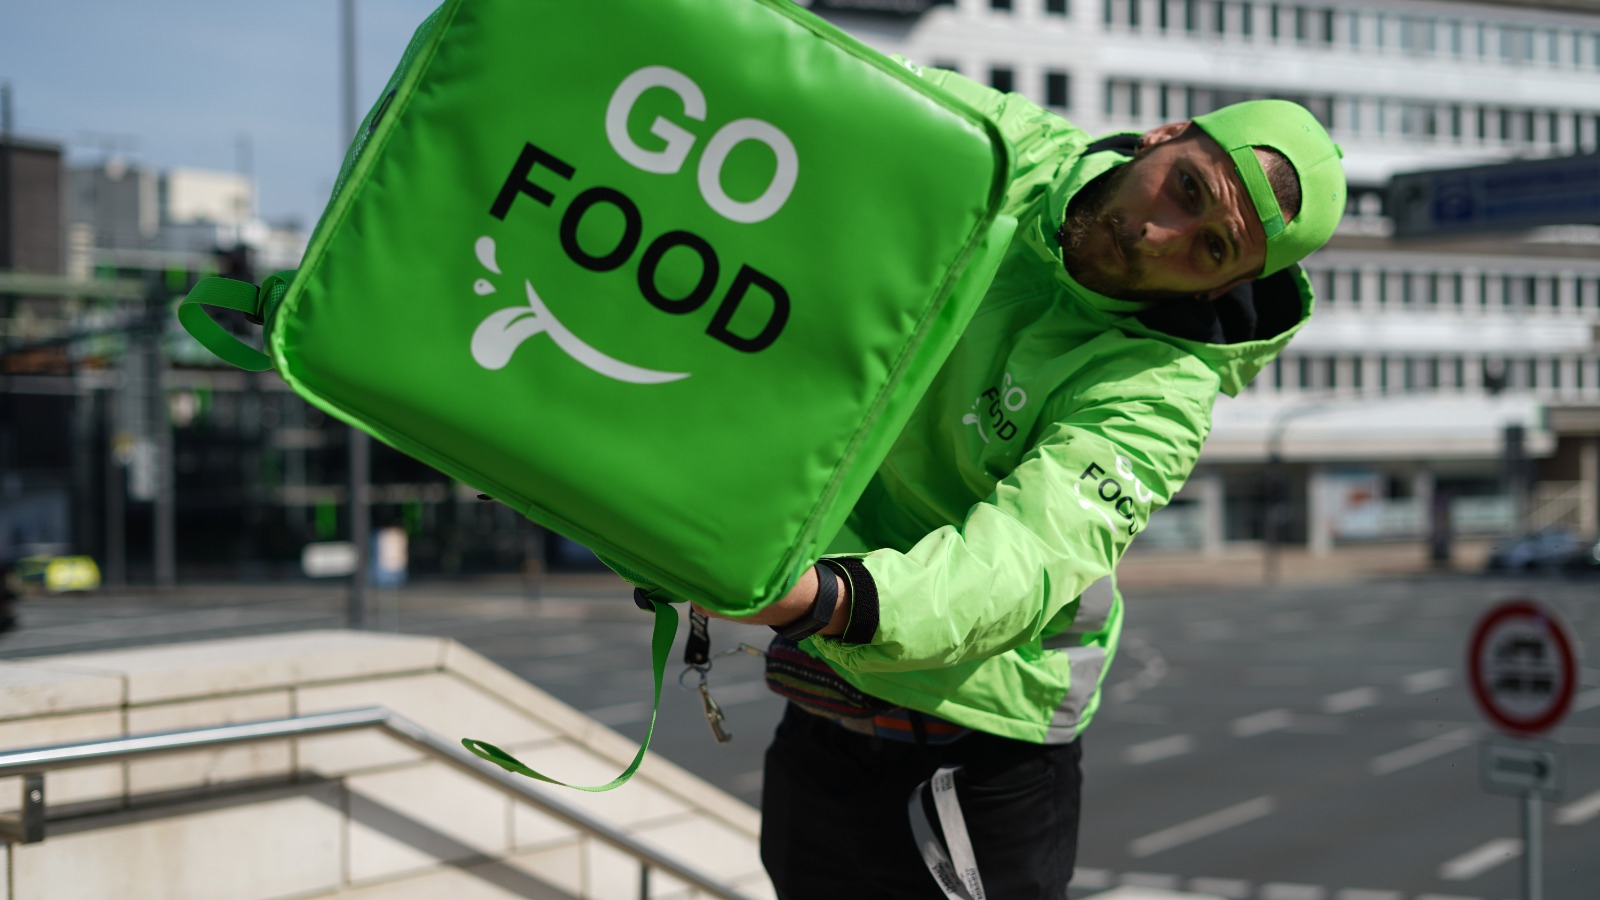 Delivery person in ‘GO FOOD’ attire on a bustling city street, indicating an active food delivery service in an urban setting.